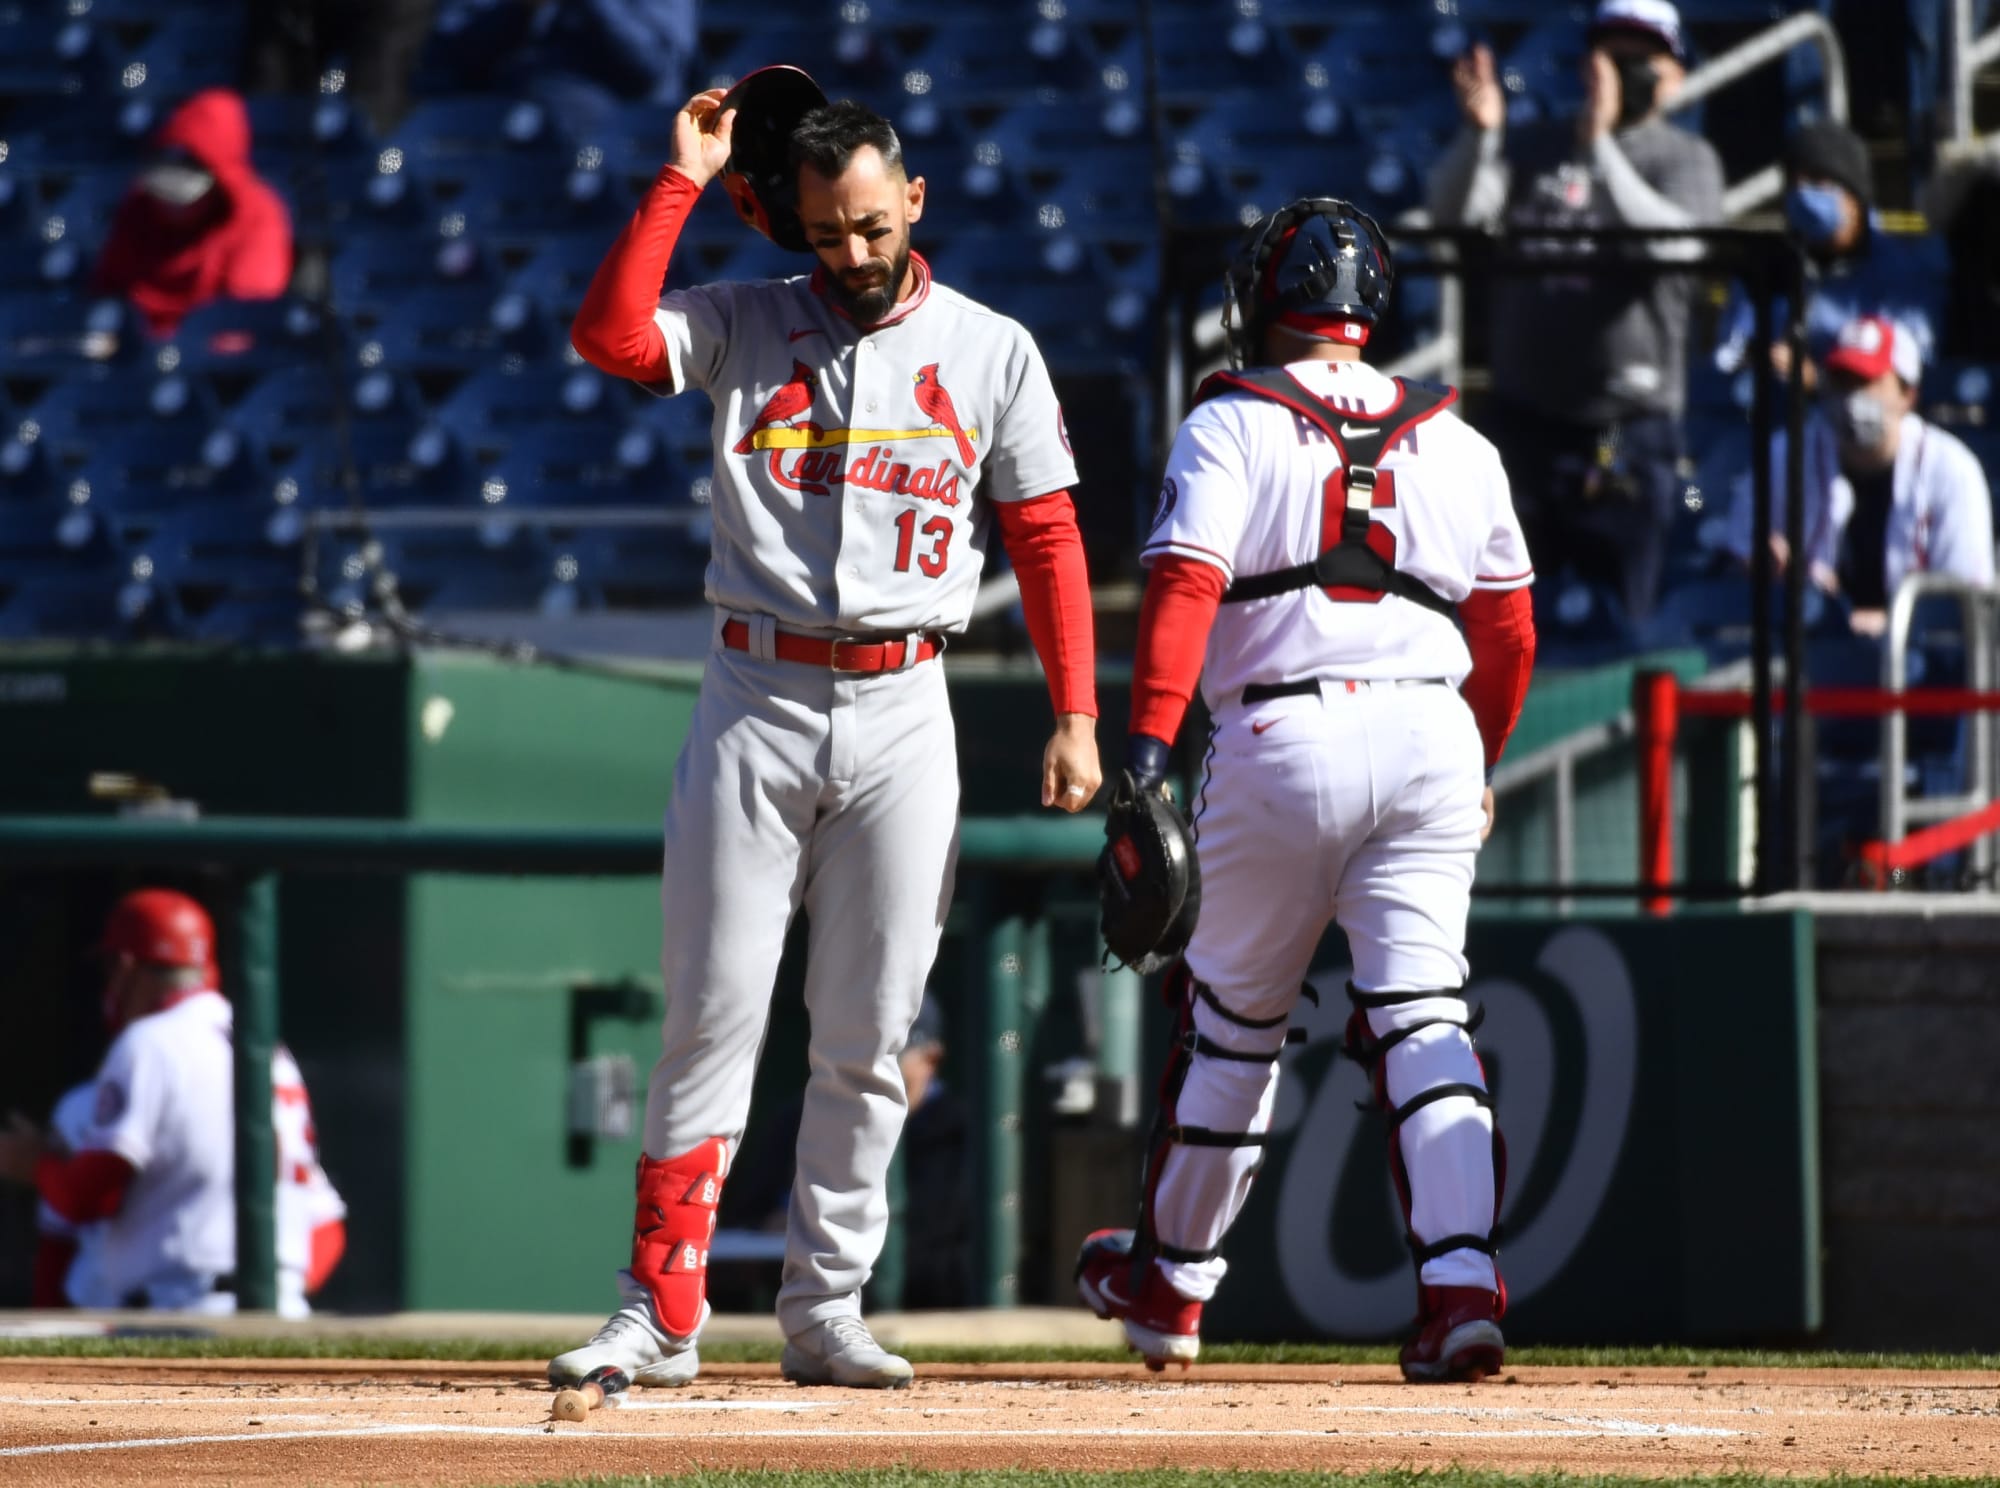 Carpenter leads surging Cardinals in push for postseason – The